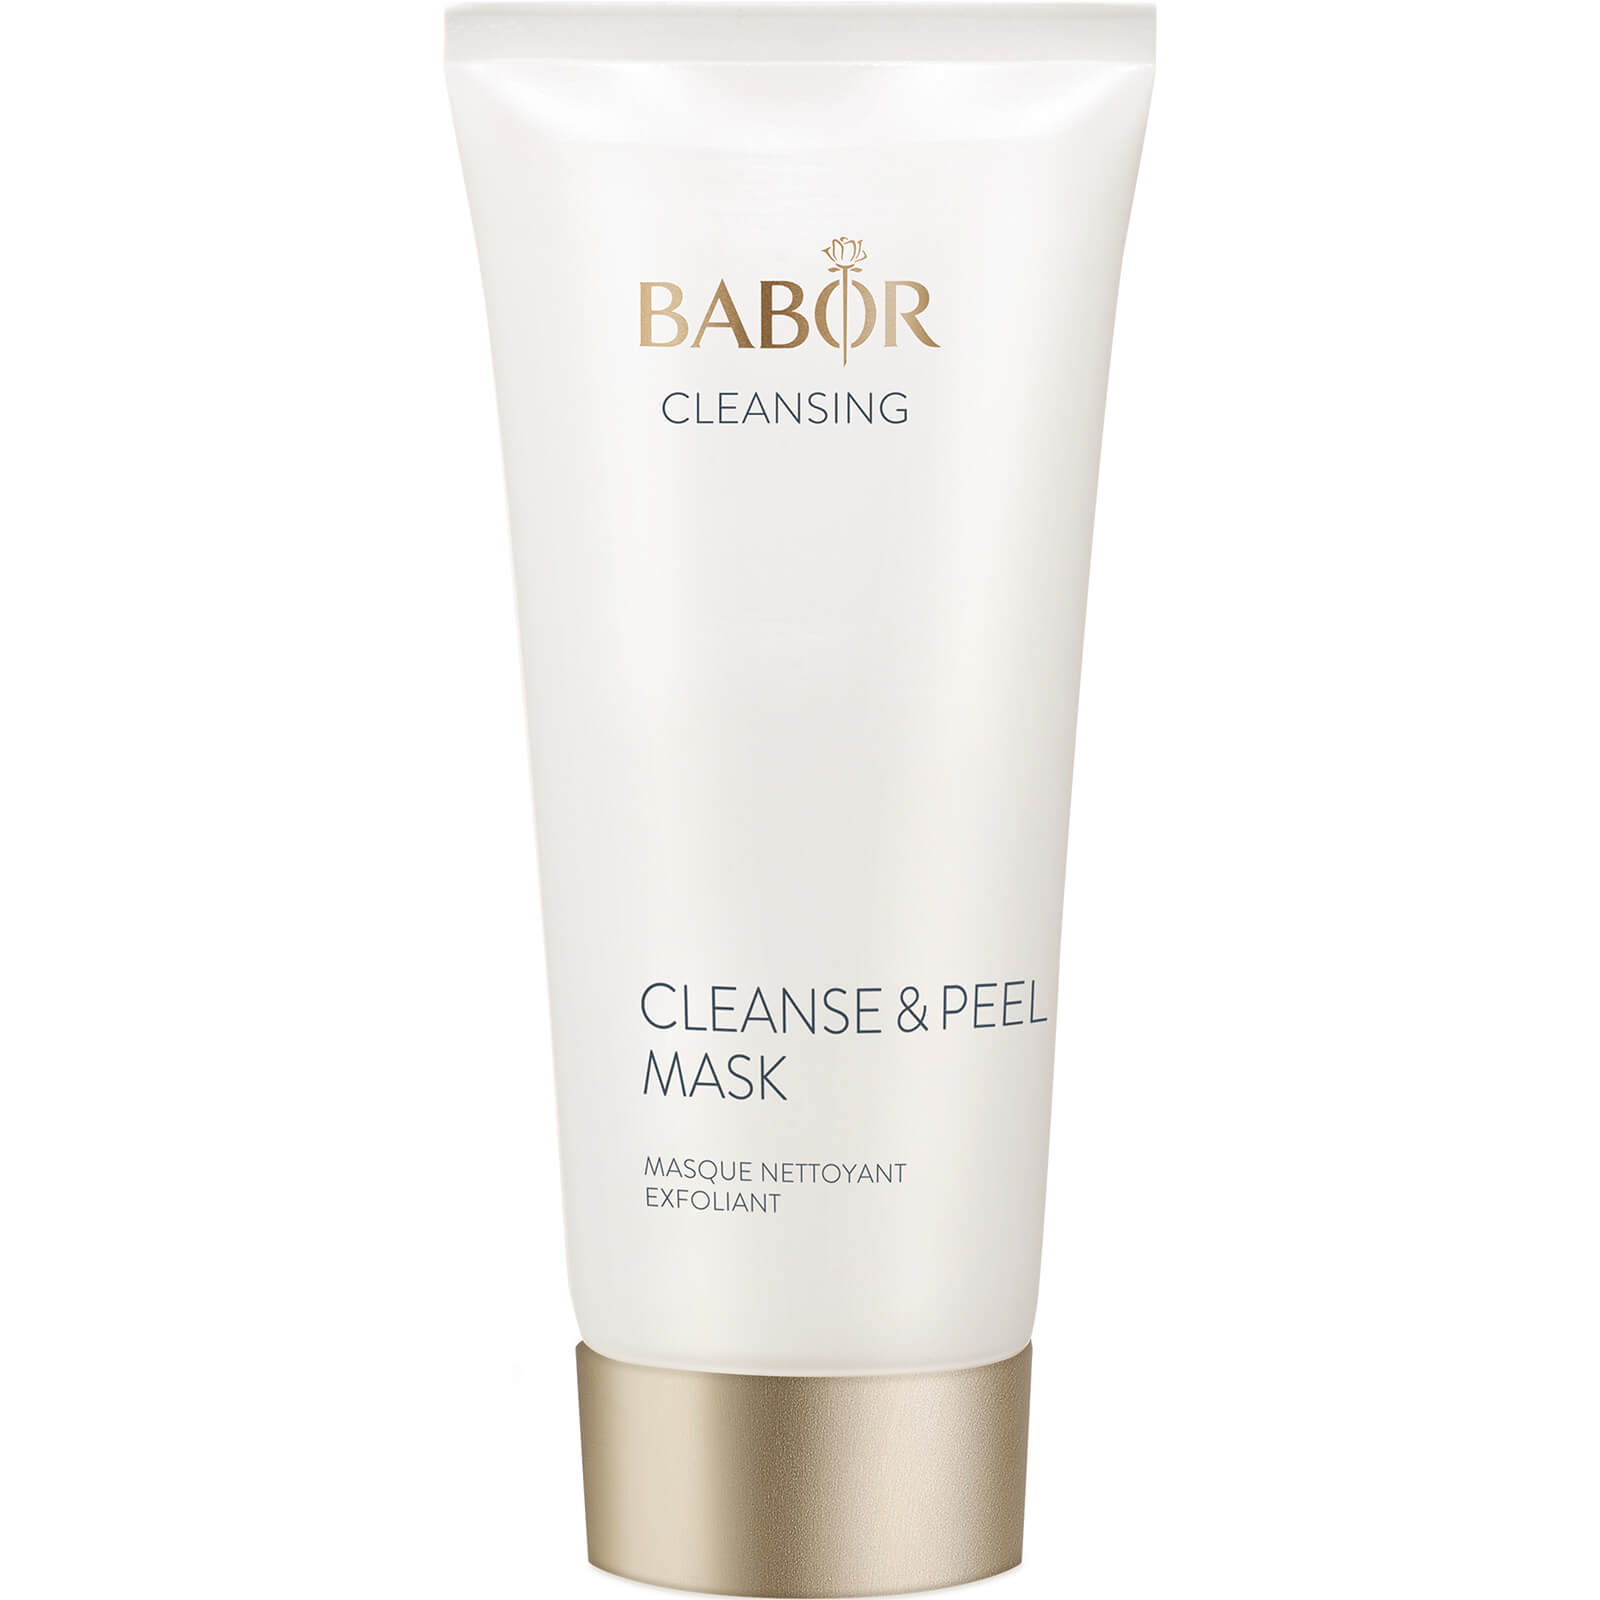 BABOR Cleansing Cleanse and Peel Mask 50ml lookfantastic.com imagine